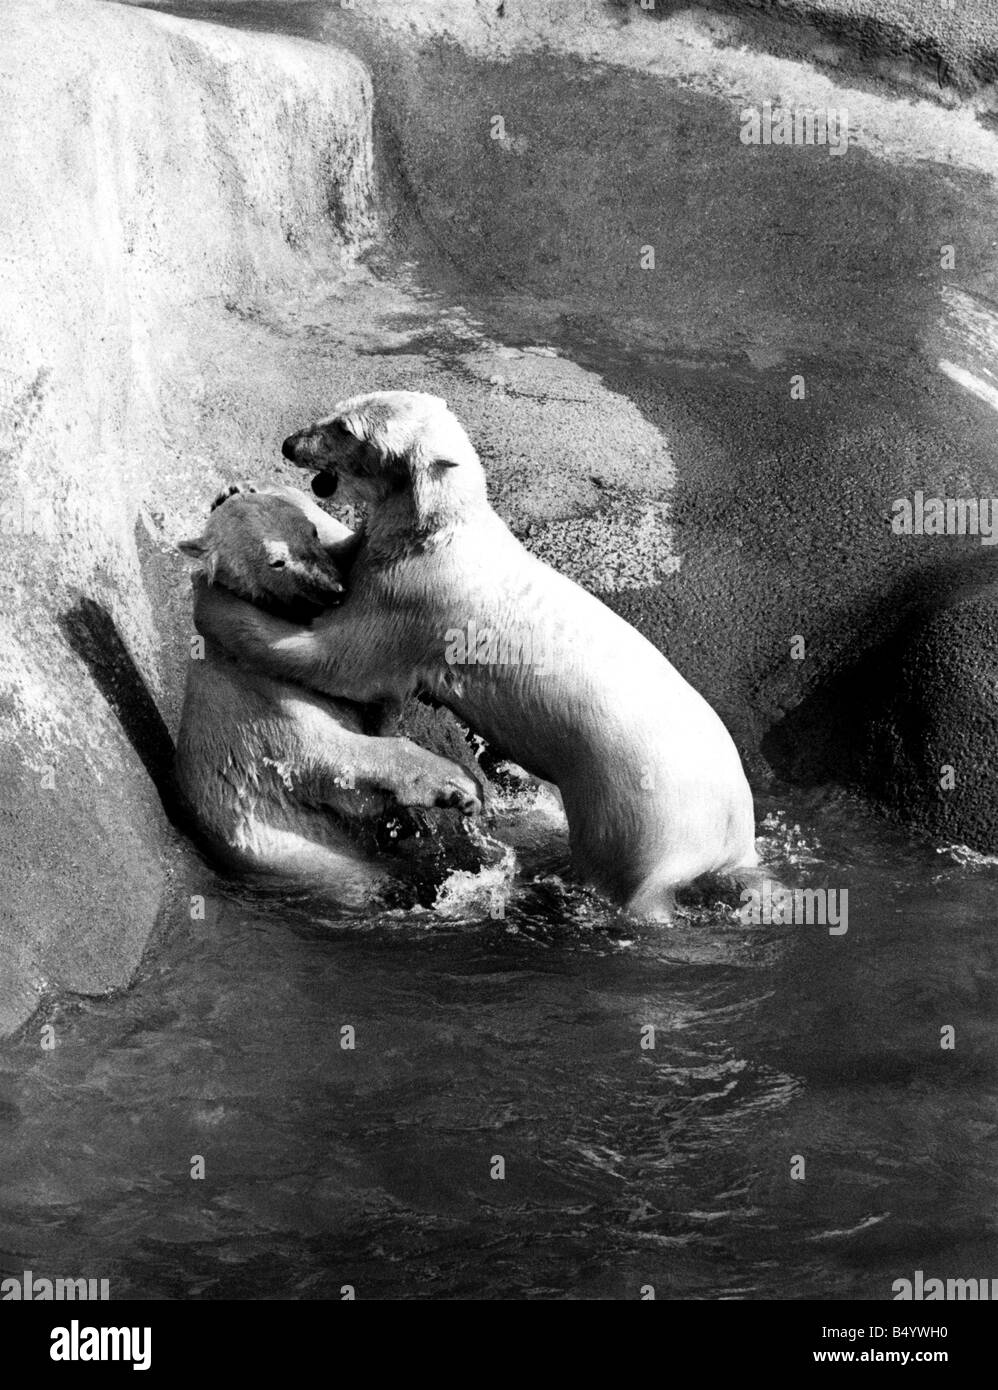 Pipaluk, the London Zoo's cuddly little polar bear cub of last year has grown up fast, and the zoo authorities have recognised his approaching adulthood by providing him with a potential mate, in the form of Sabrina, a youngster from the Bristol Zoo. April 1969 P000437 Stock Photo